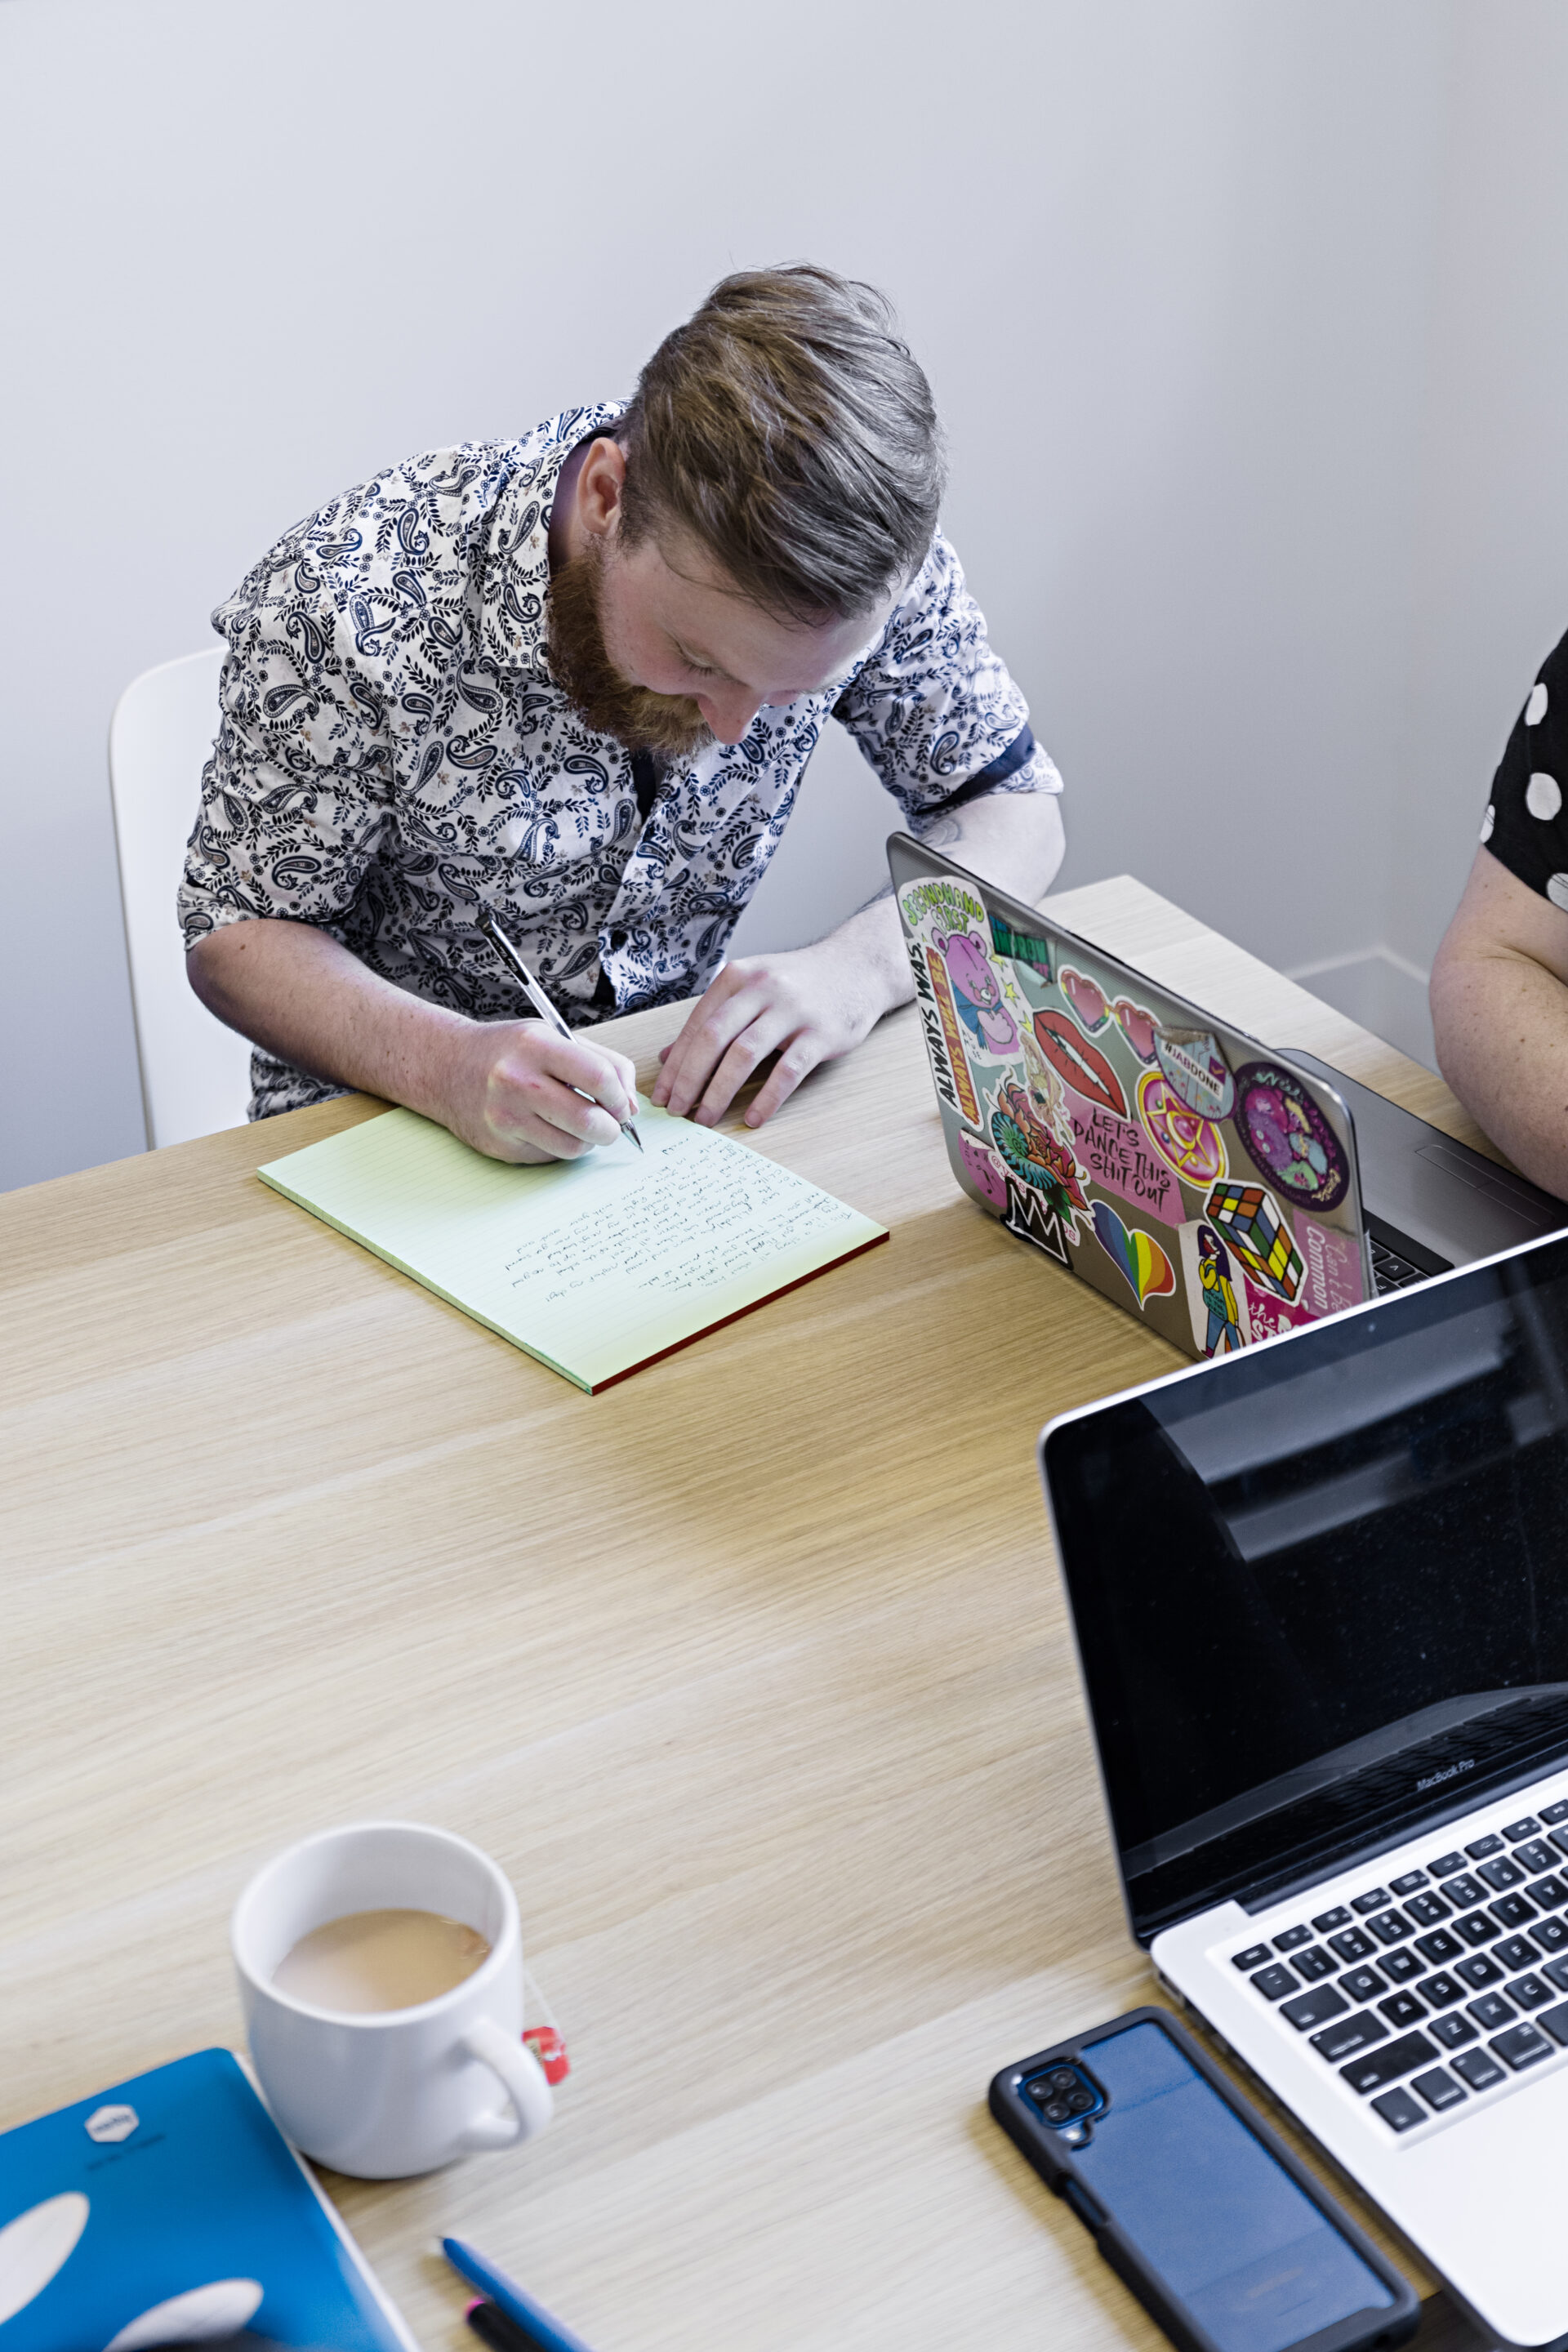 Photo of two people working at a wooden desk, one to the left and one is cropped out of the photo on the right. The first person is hand-writing on a yellow note pad and wearing a black and white patterned shirt. The person on the right is working at a grey laptop covered in brightly coloured stickers.